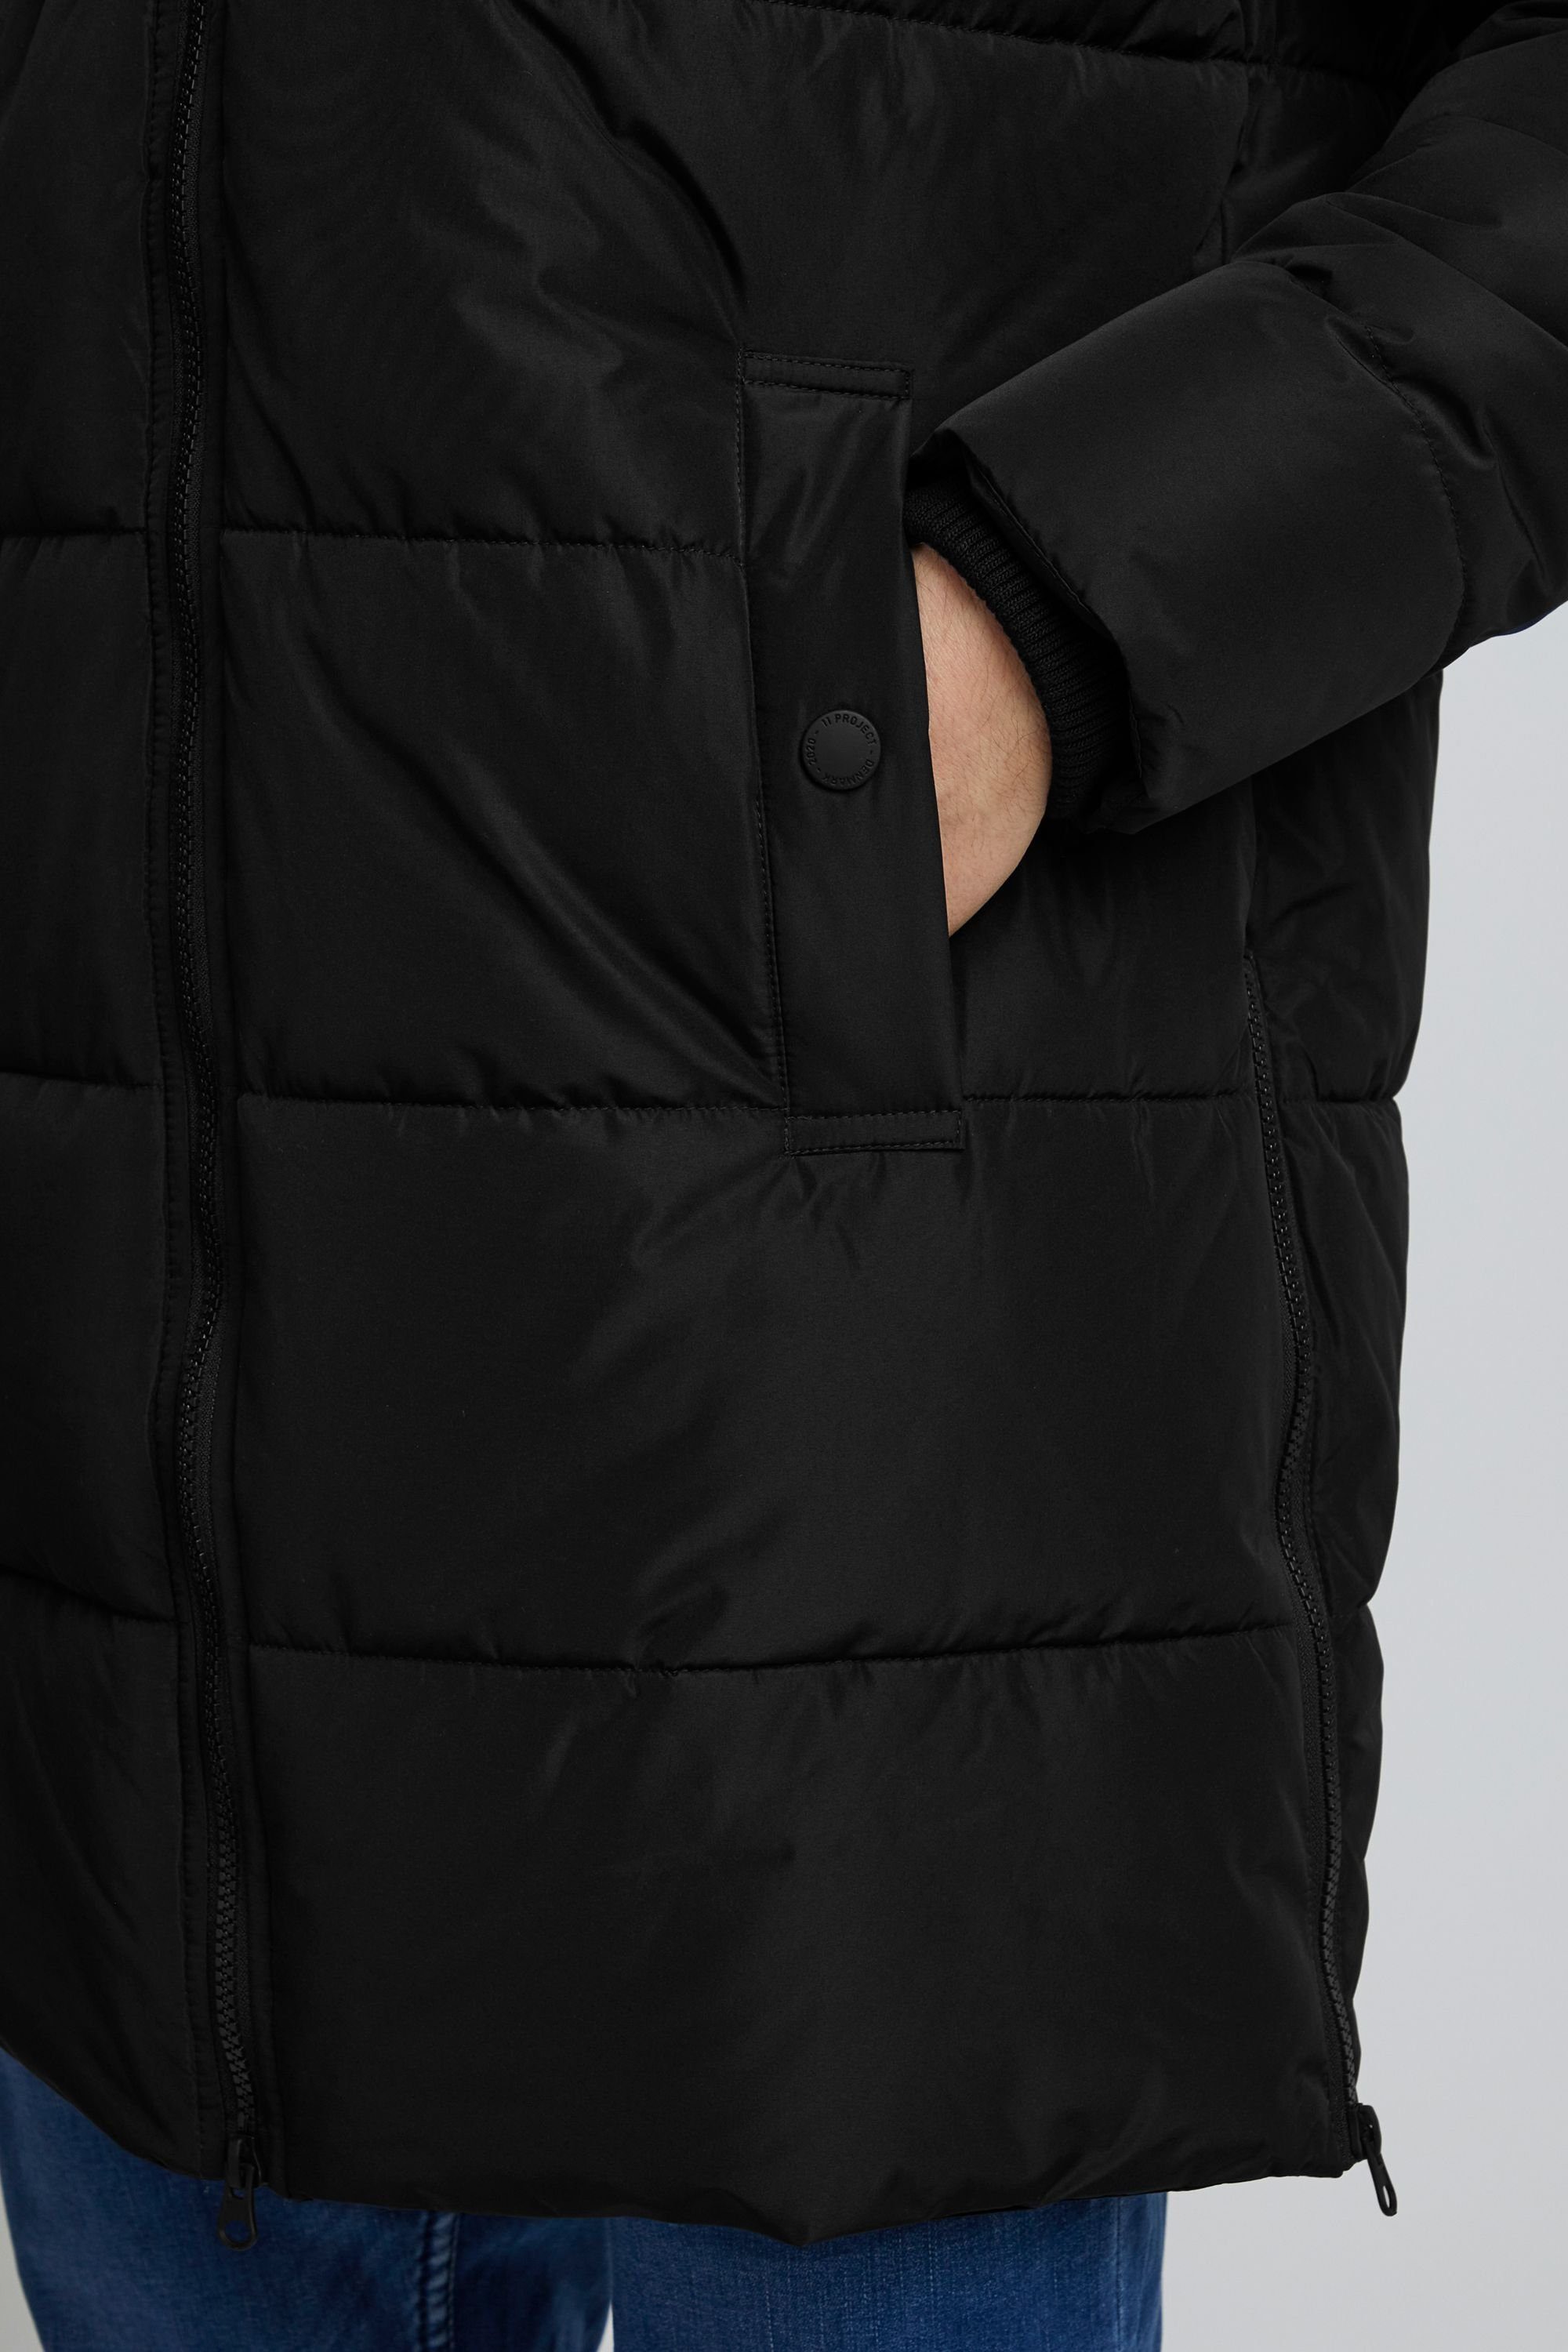 Project Parka Parka Project Long 11 Tibor Black quilted 11